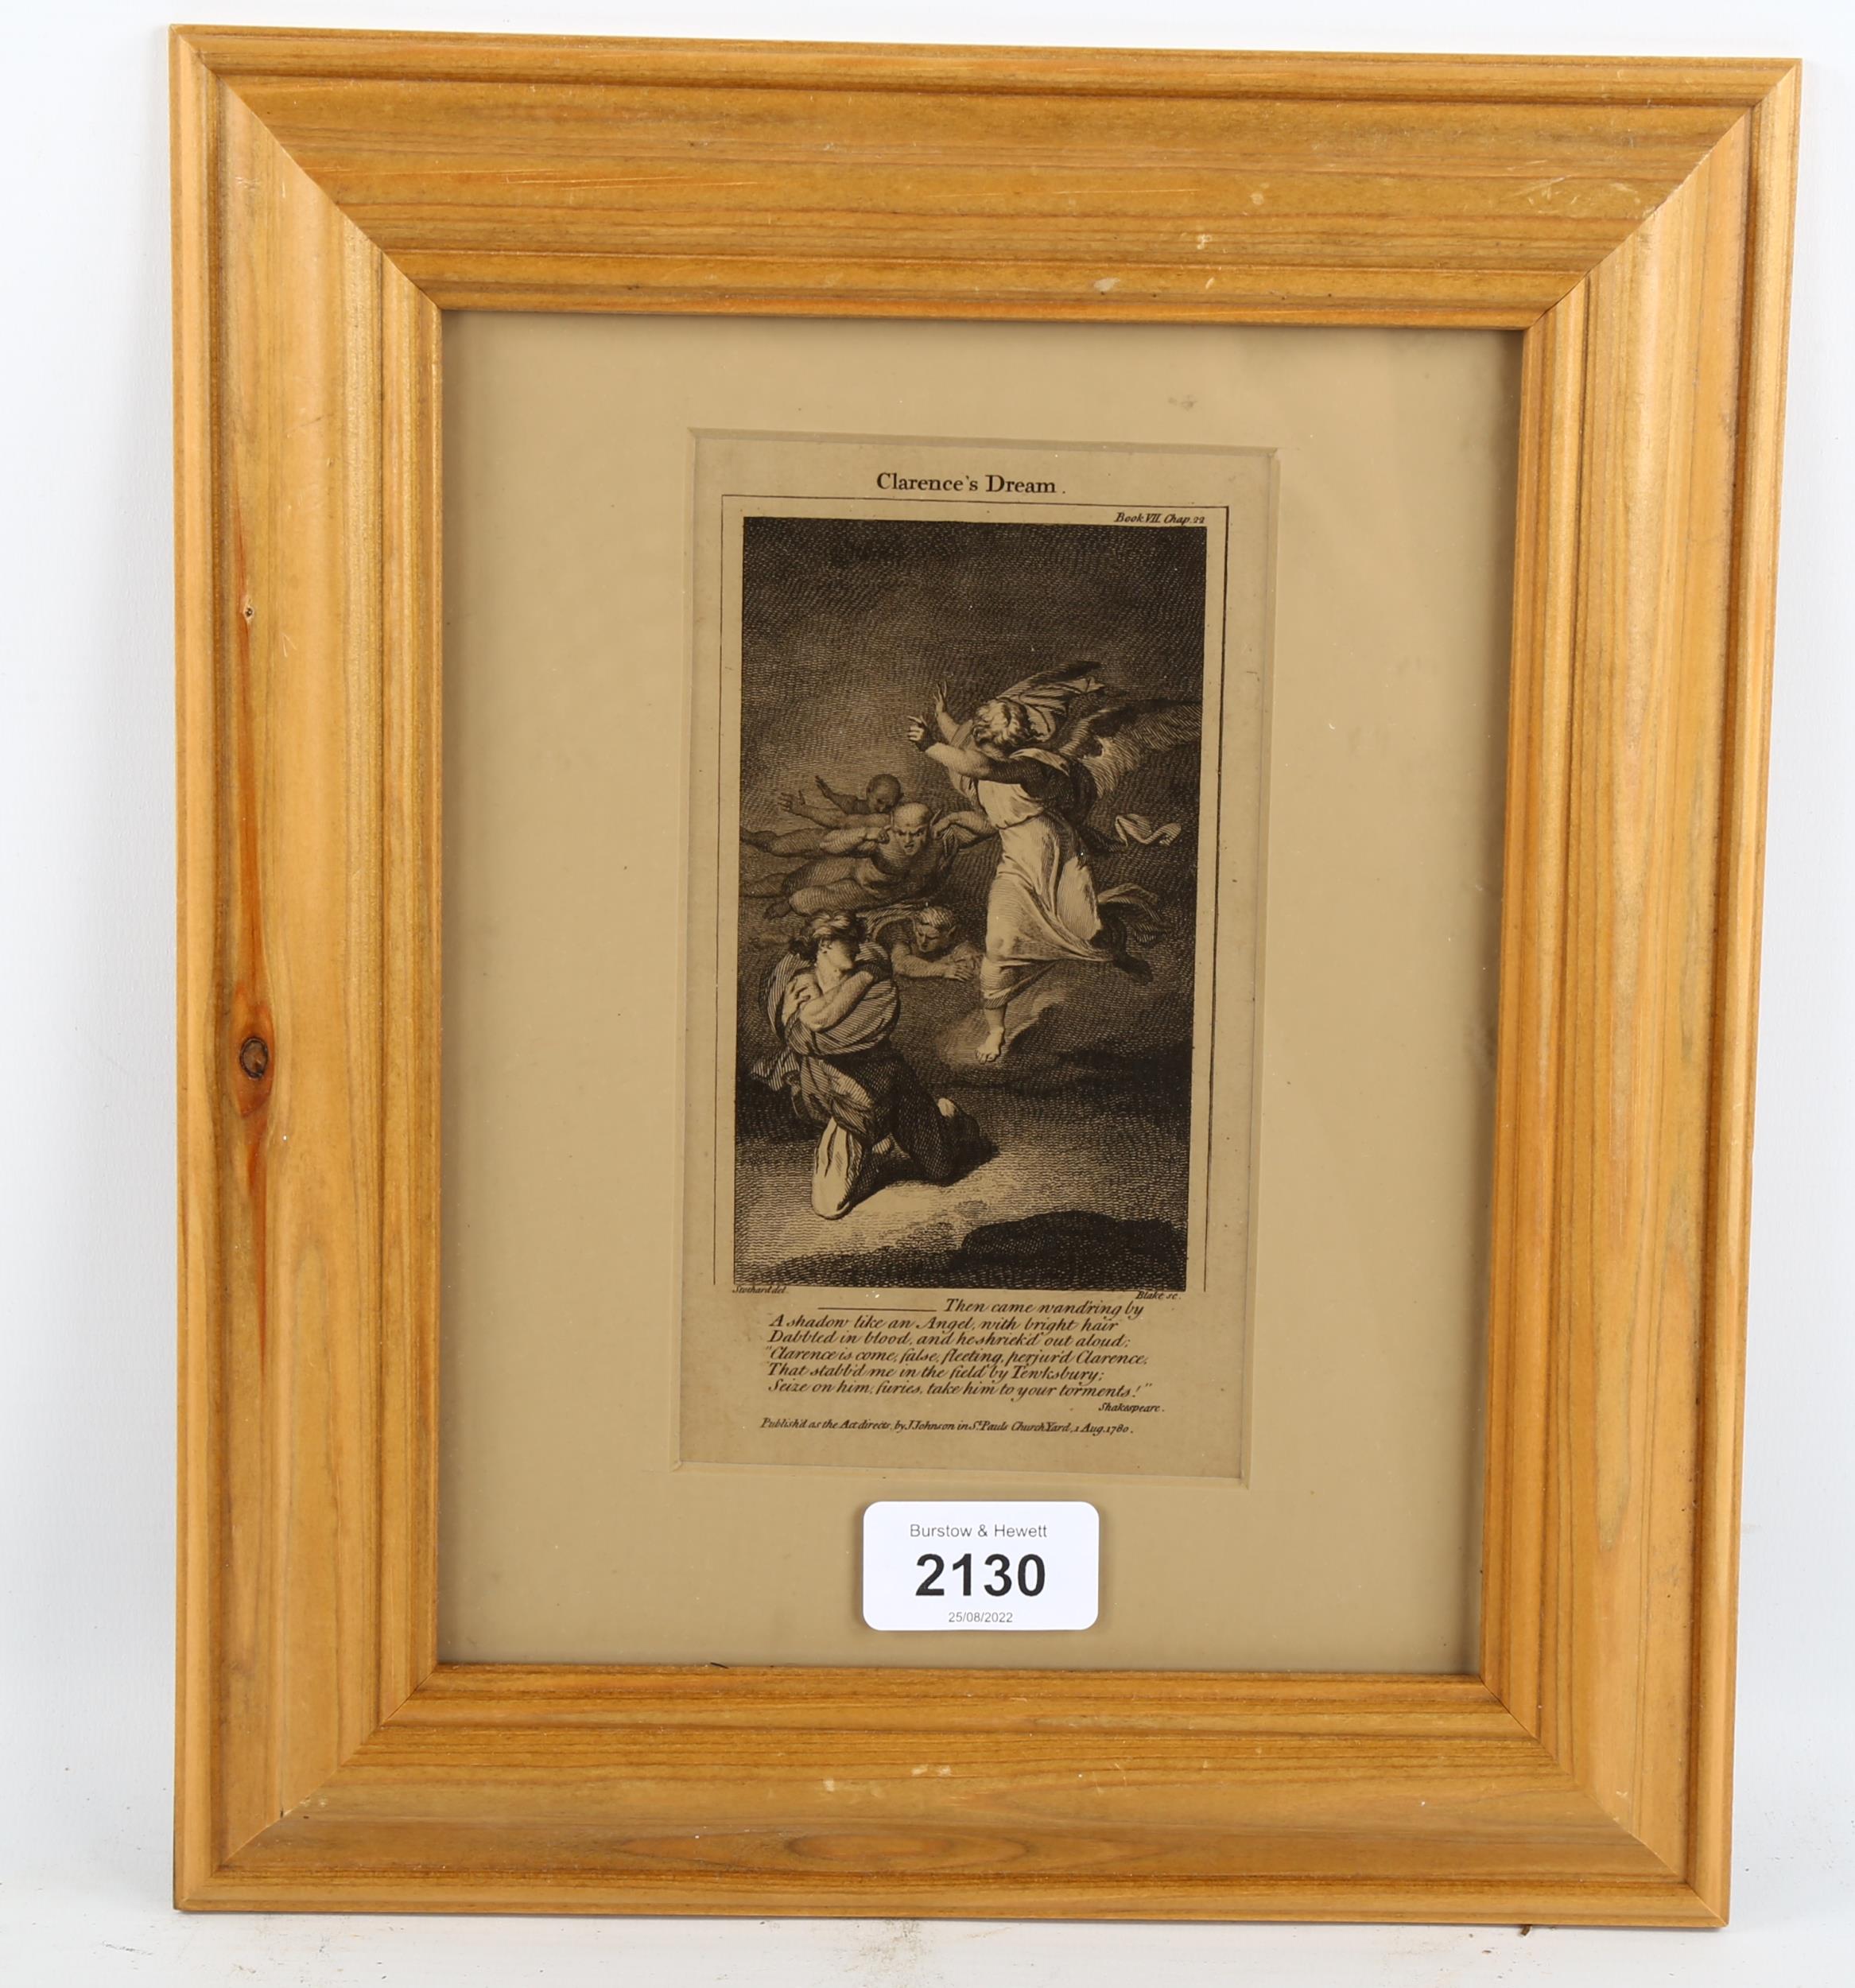 William Blake, Clarence's Dream, engraving, after Stodhard 1780, image 12cm x 7cm, framed Even paper - Image 2 of 4